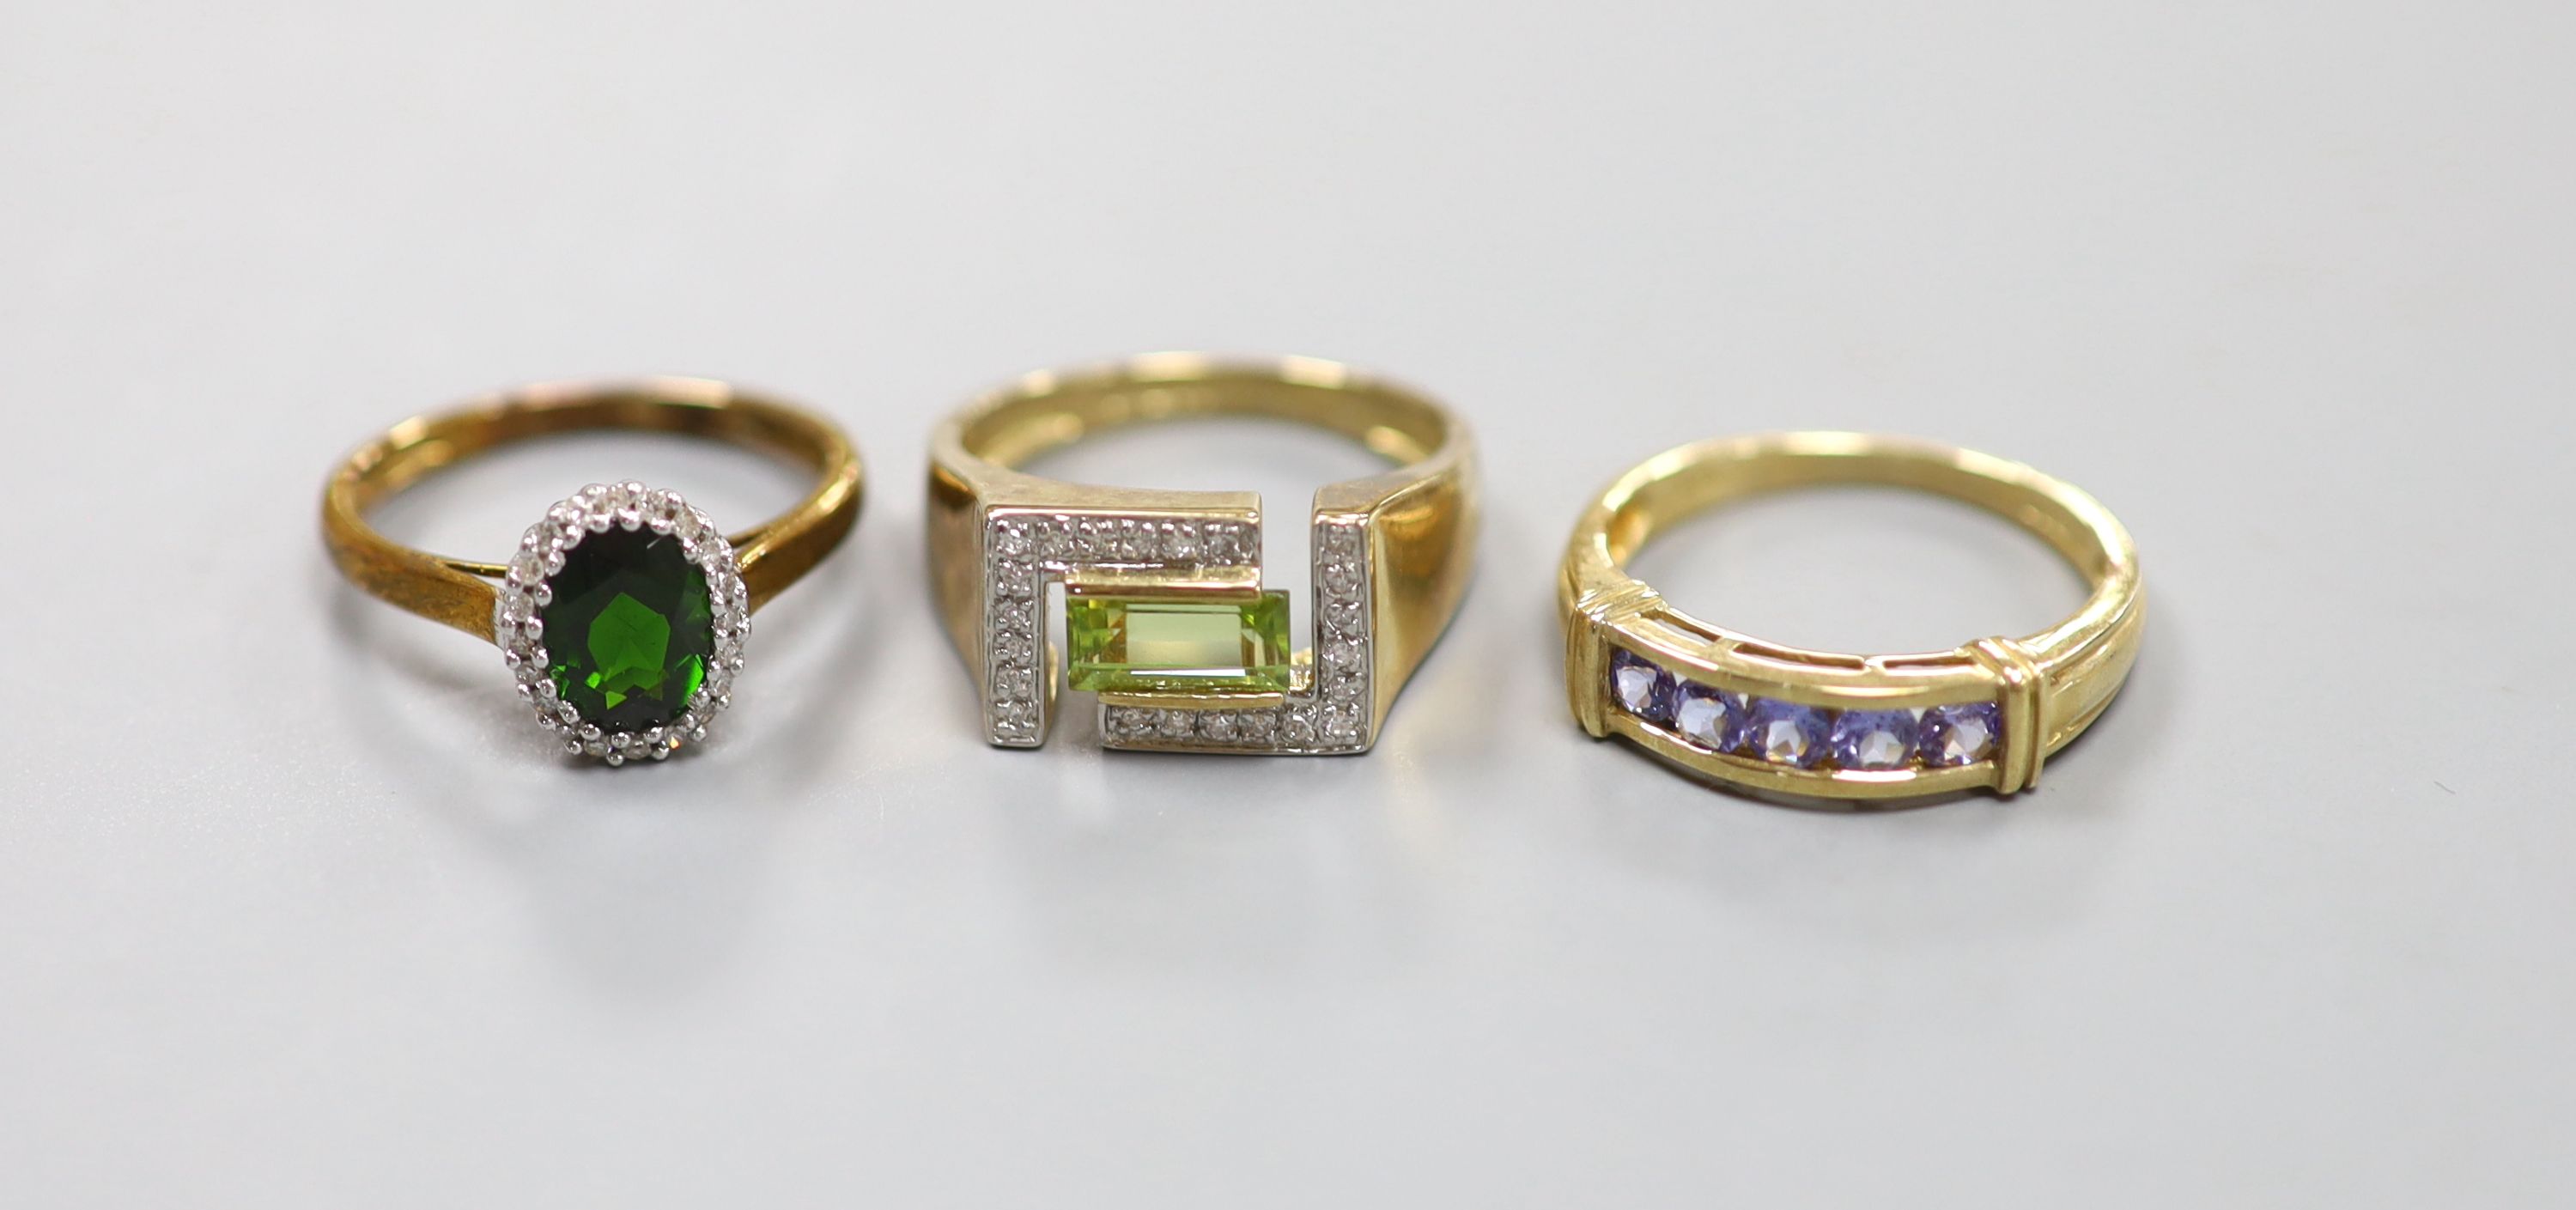 A peridot and diamond set 9ct gold ring, a 9ct gold cluster ring and a 9ct gold line-set five-stone ring